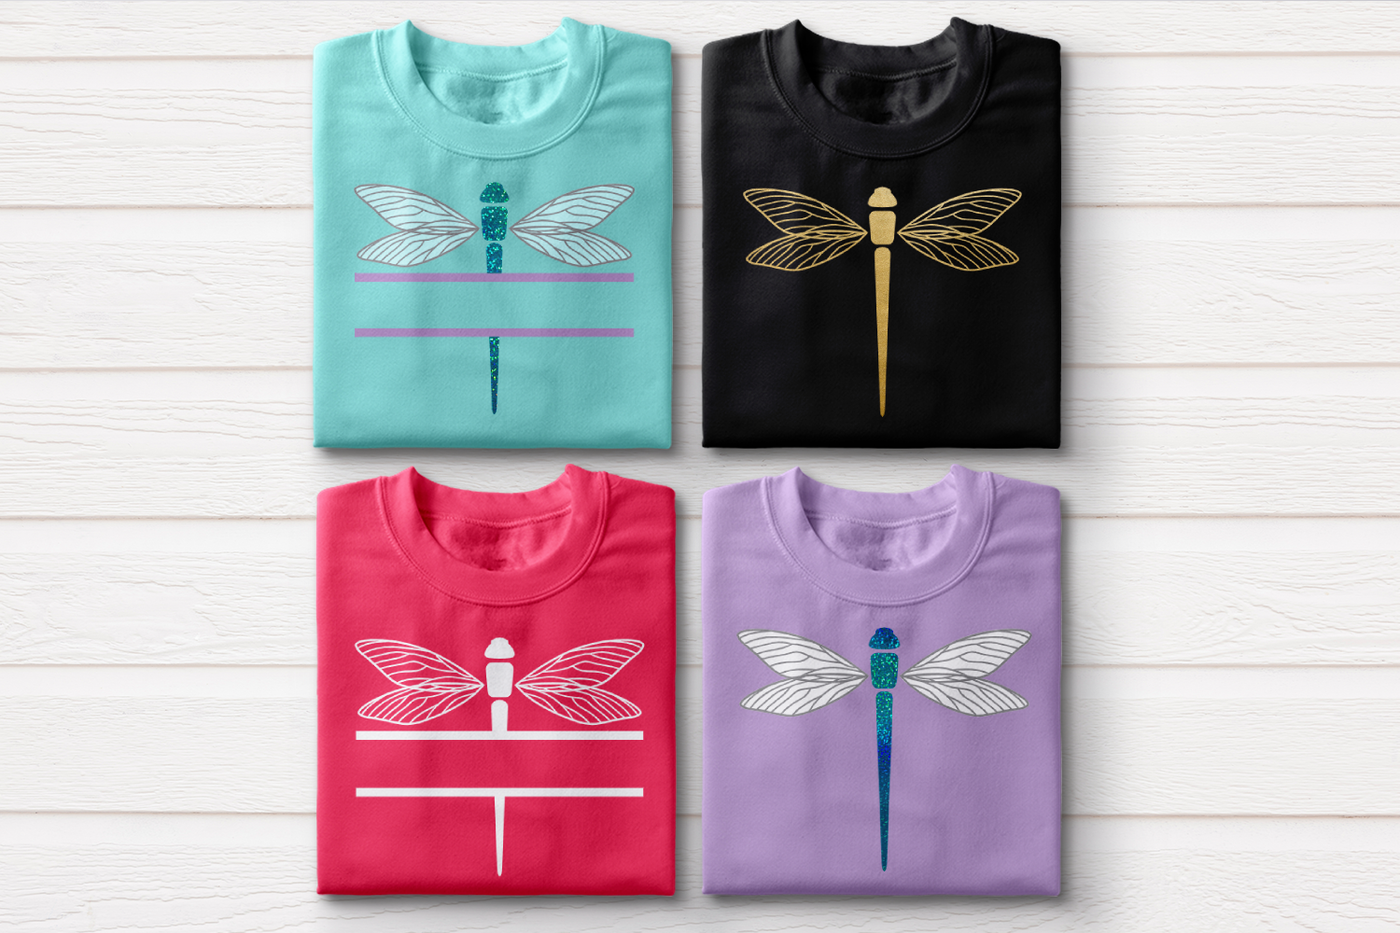 Four folded sweatshirts. Two have dragonflies, and two have dragonflies with splits in the middle. One of each is done in a single color, and one of each is done as a multicolor design with glitter vinyl for the bodies.